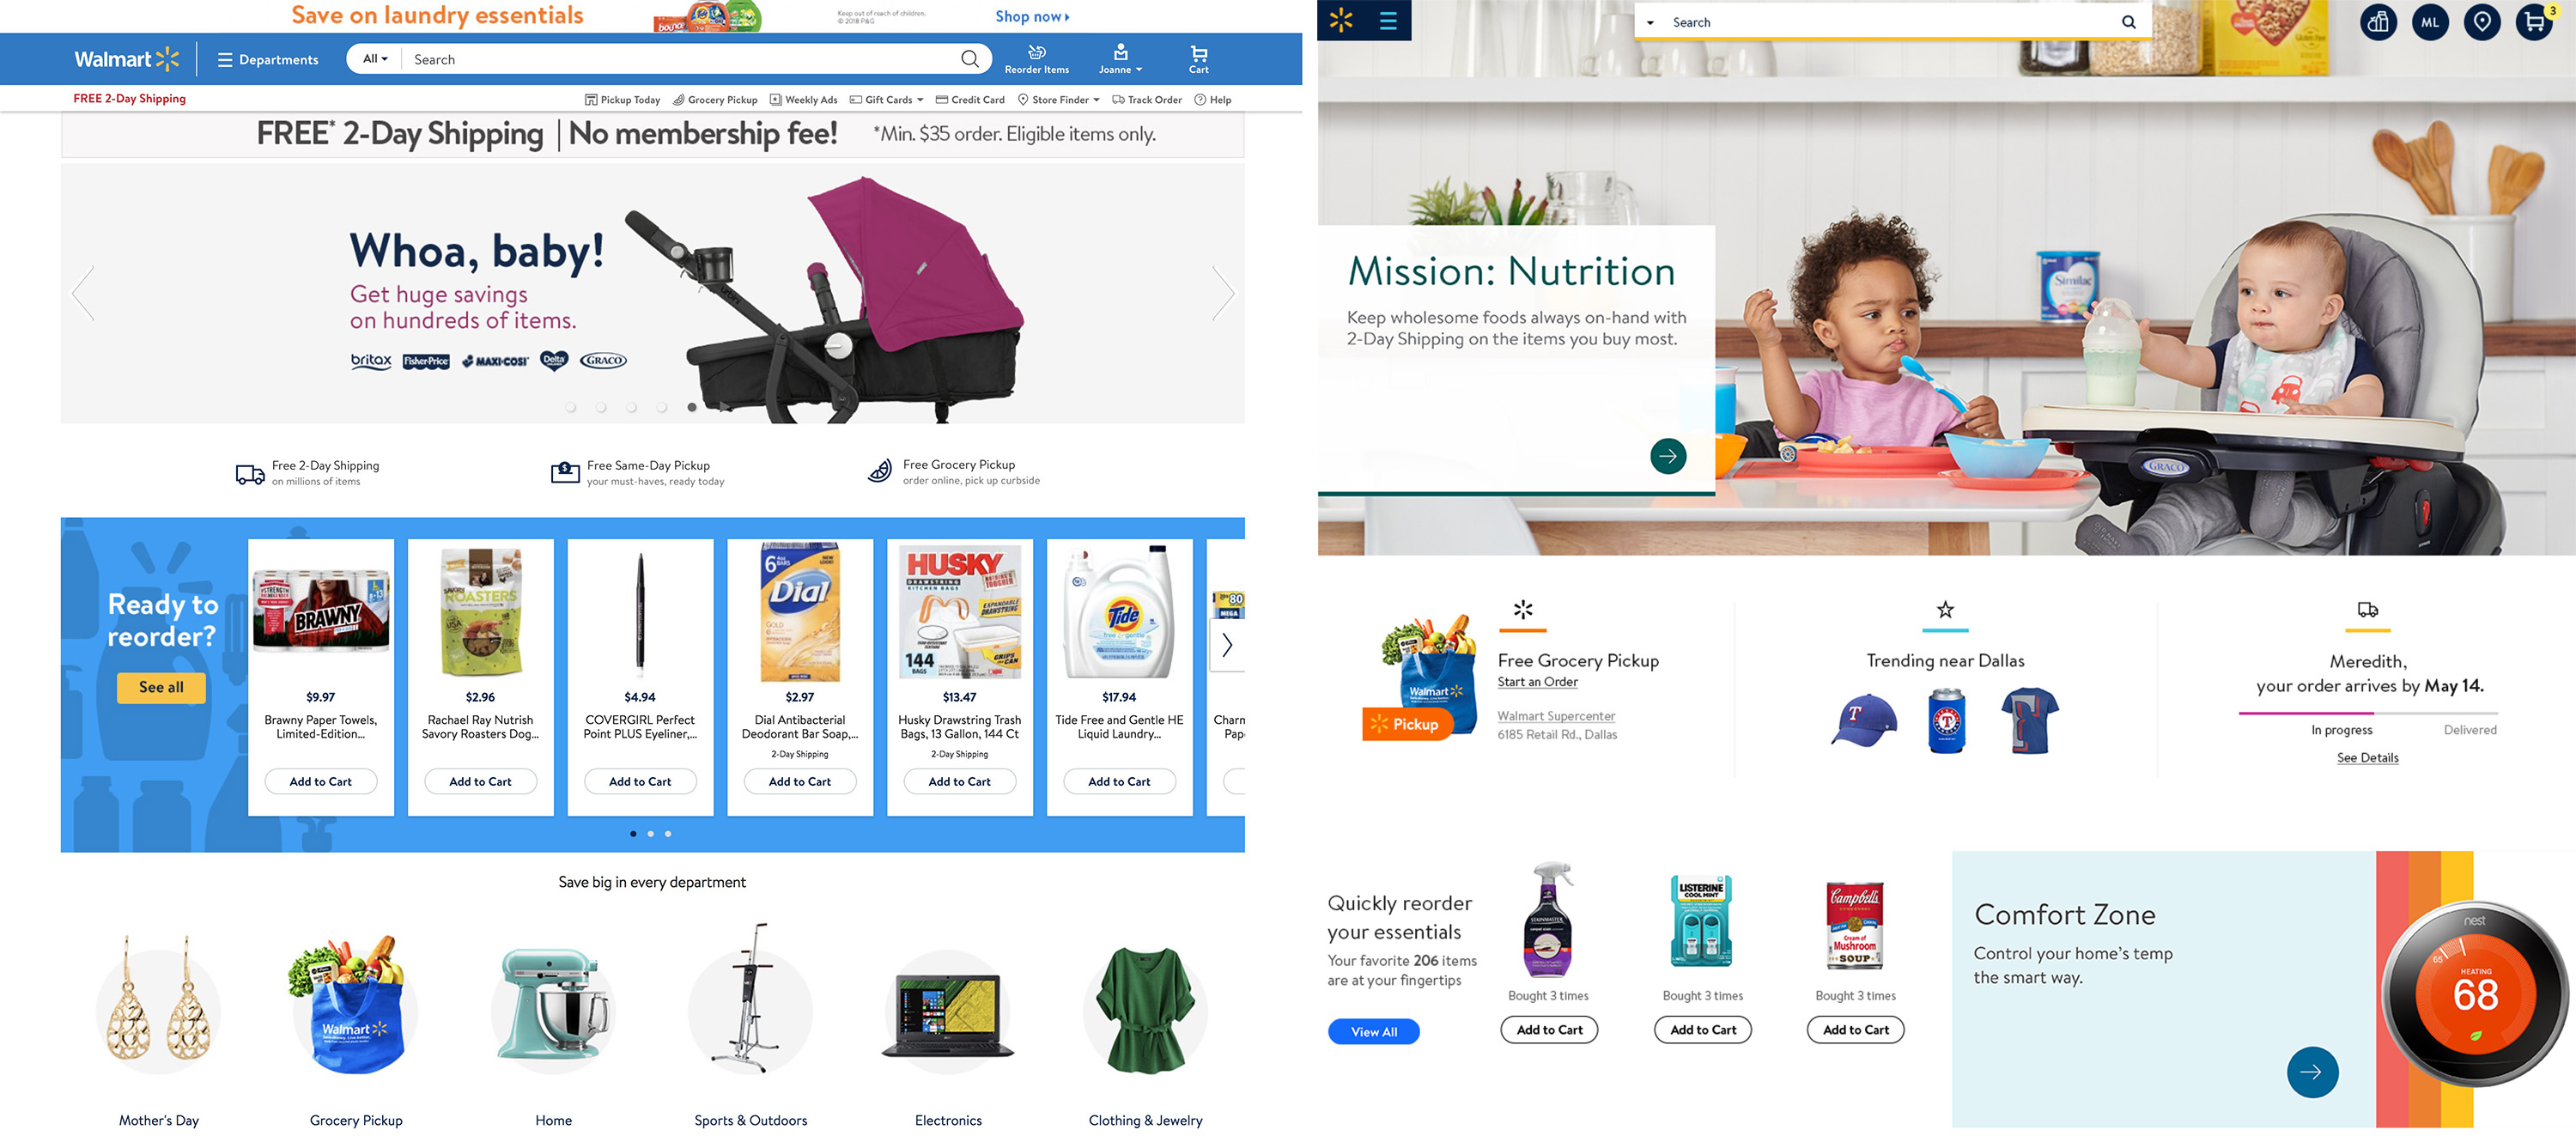 Walmart unveils Lord & Taylor site as it tries to go upscale